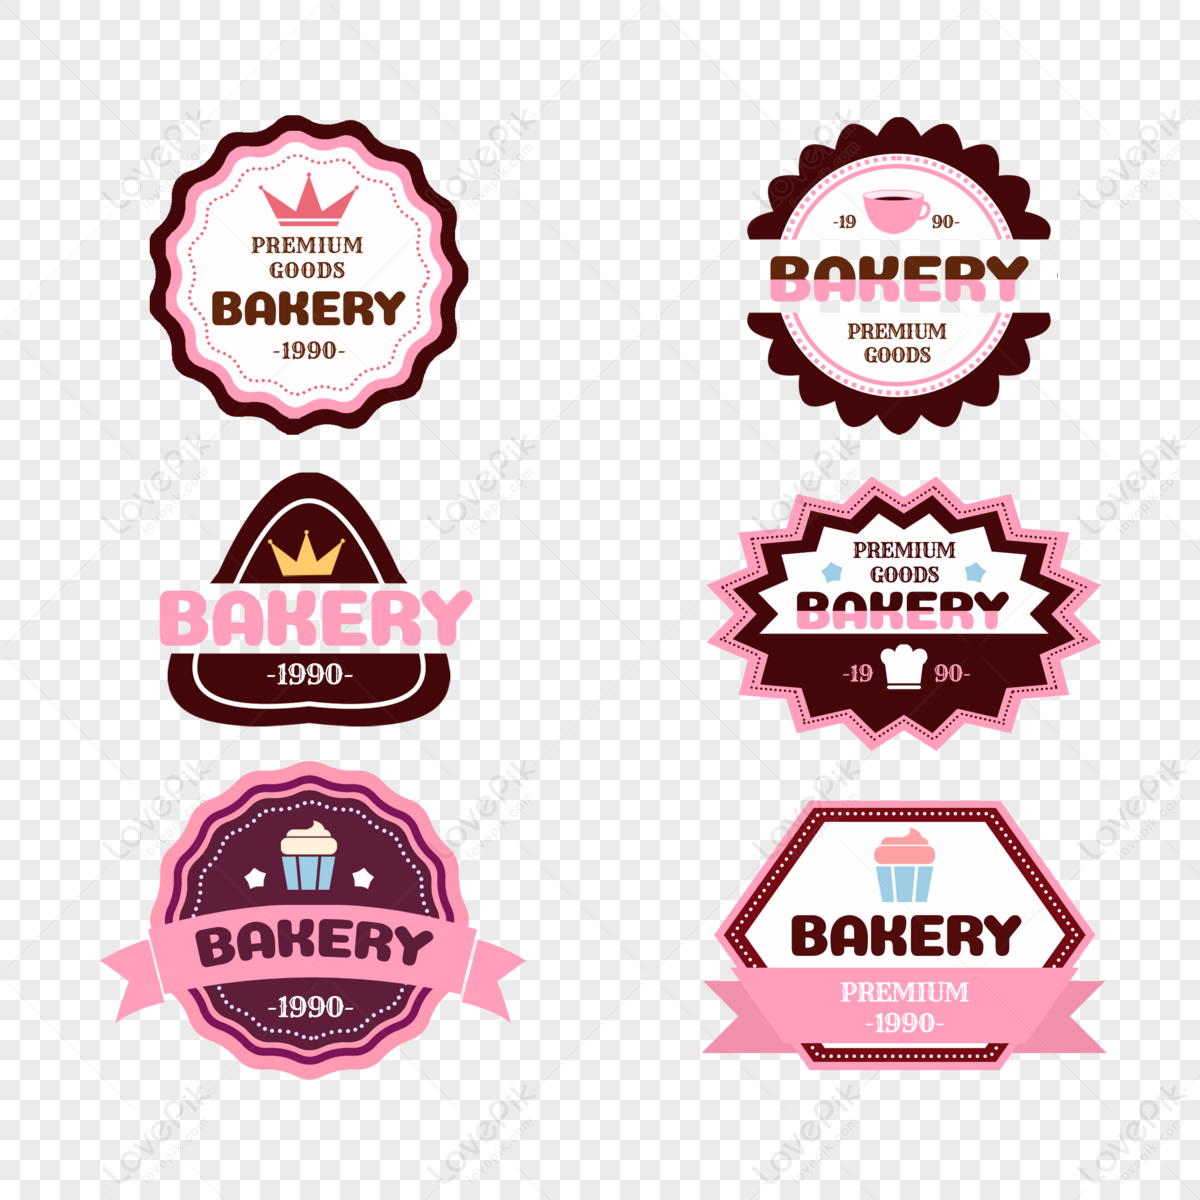 Bakery Logo Vector PNG, Vector, PSD, and Clipart With Transparent  Background for Free Download | Pngtree